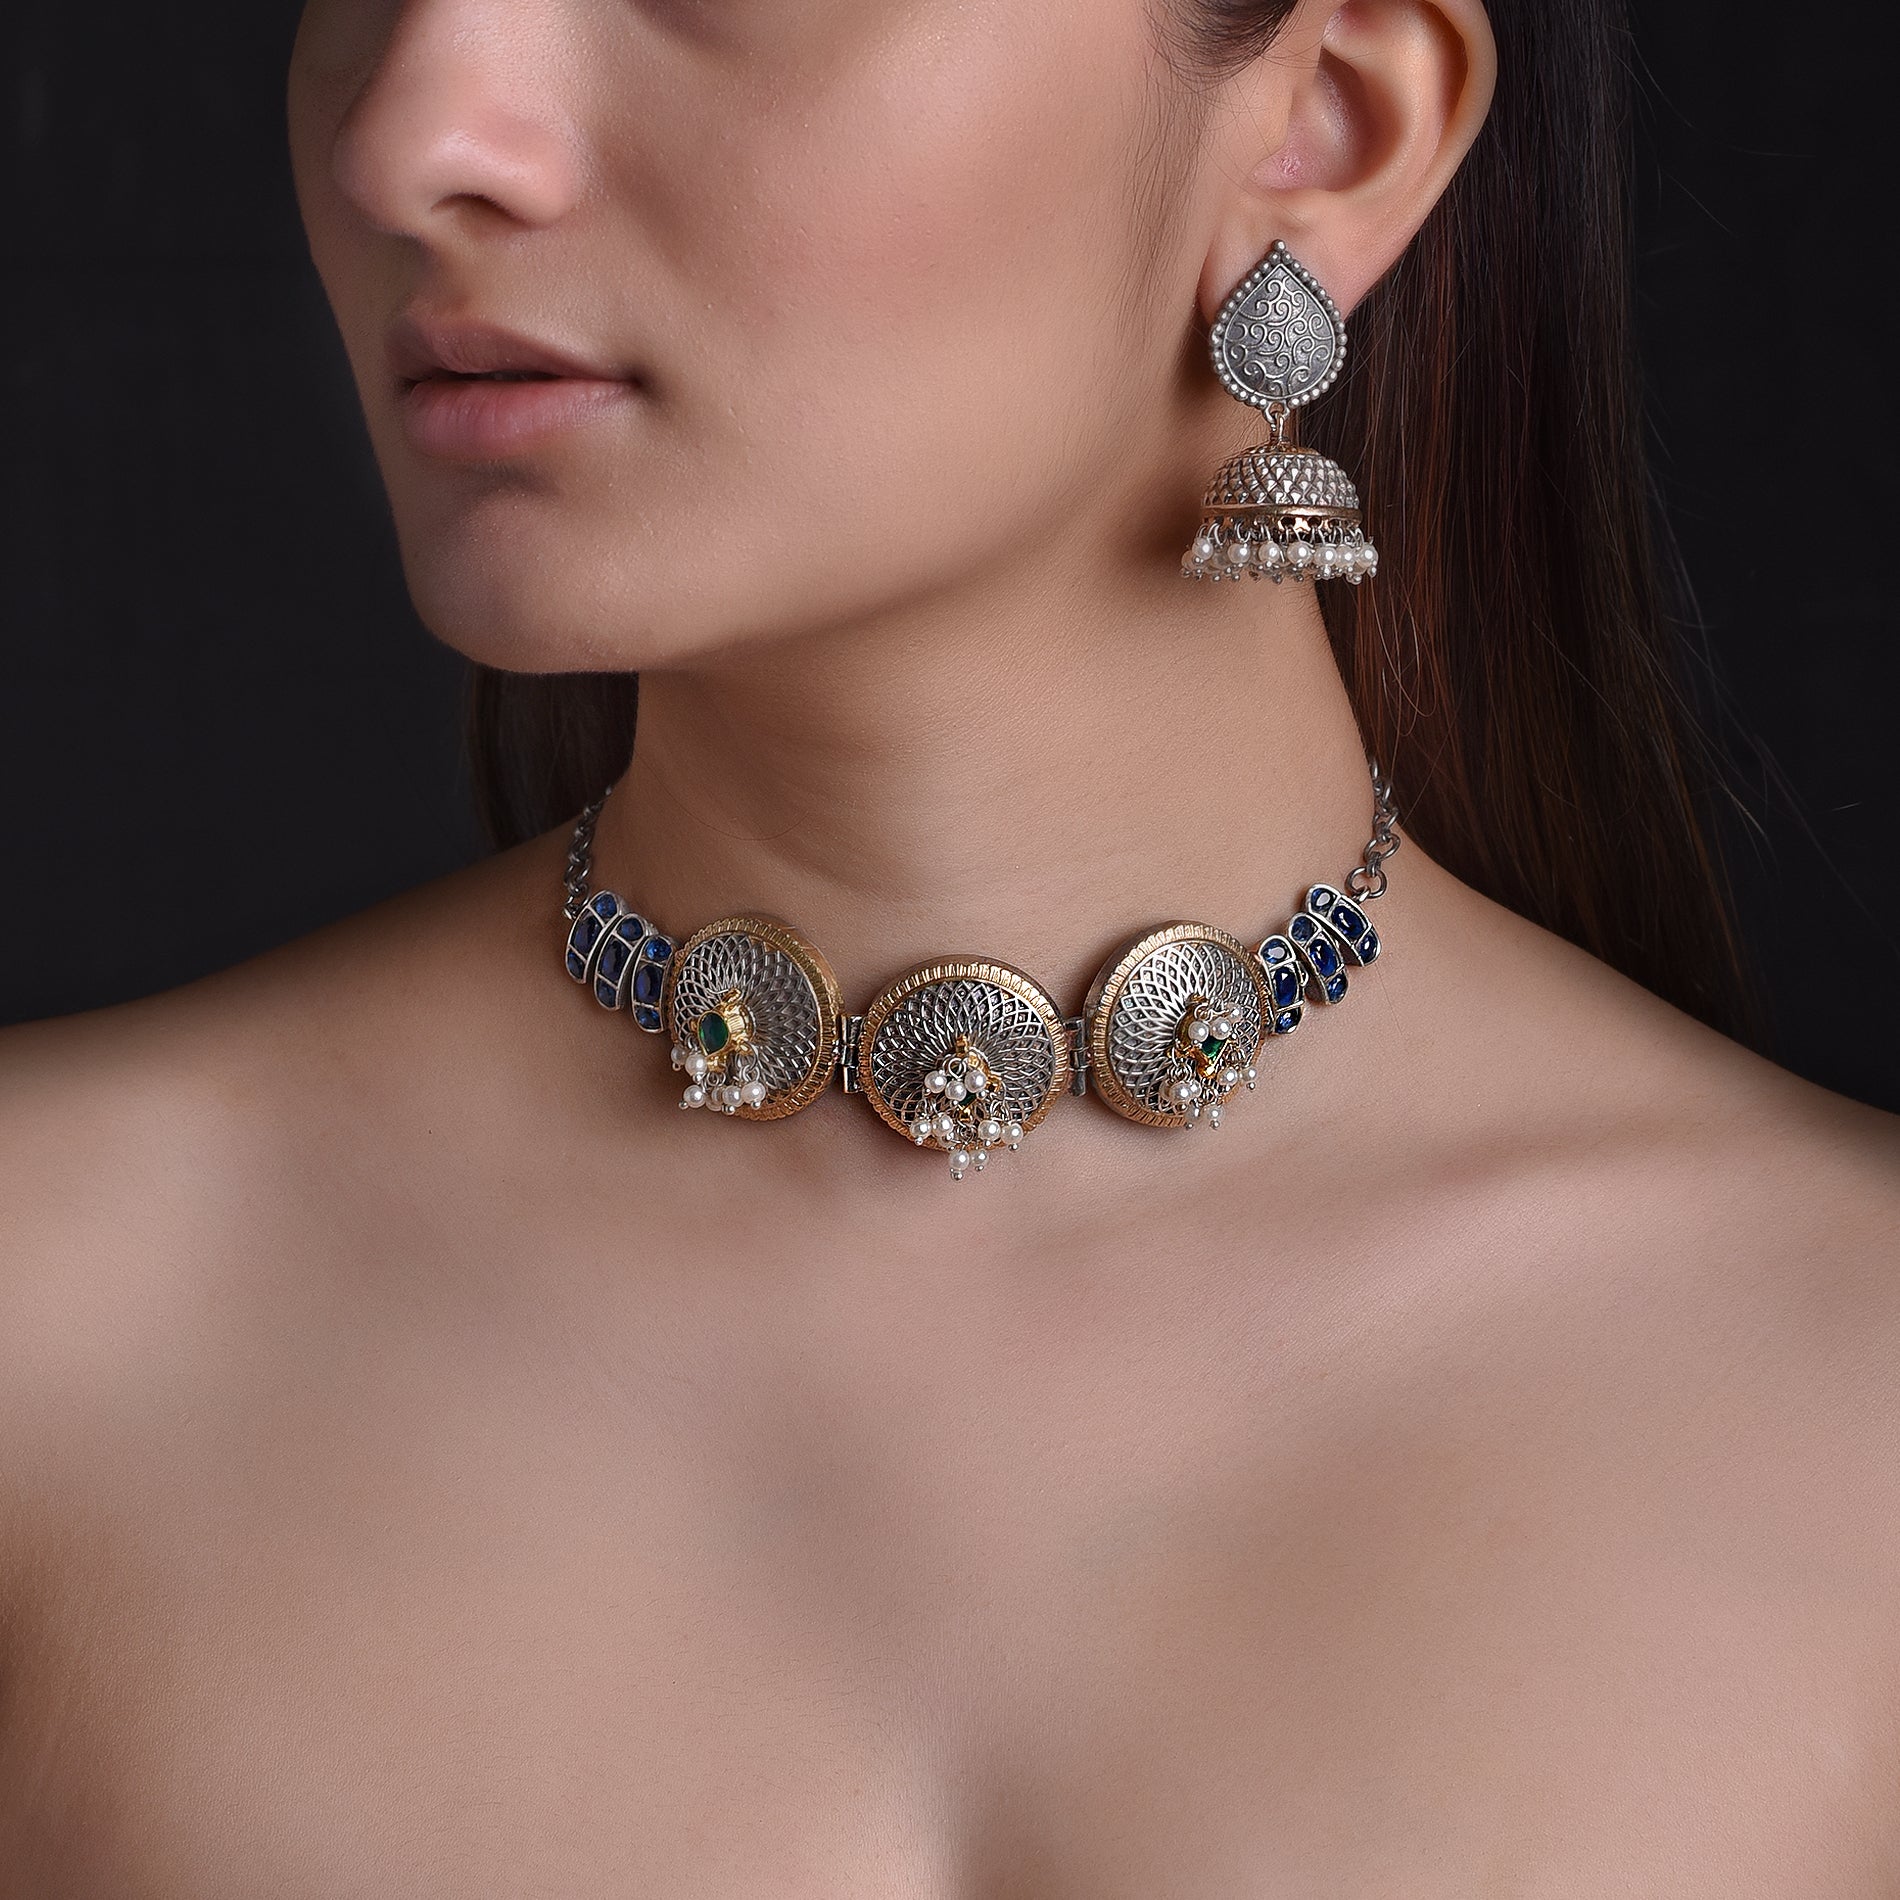 Limited Edition German Silver Choker with Kundan Pieces and Jhumka Earrings